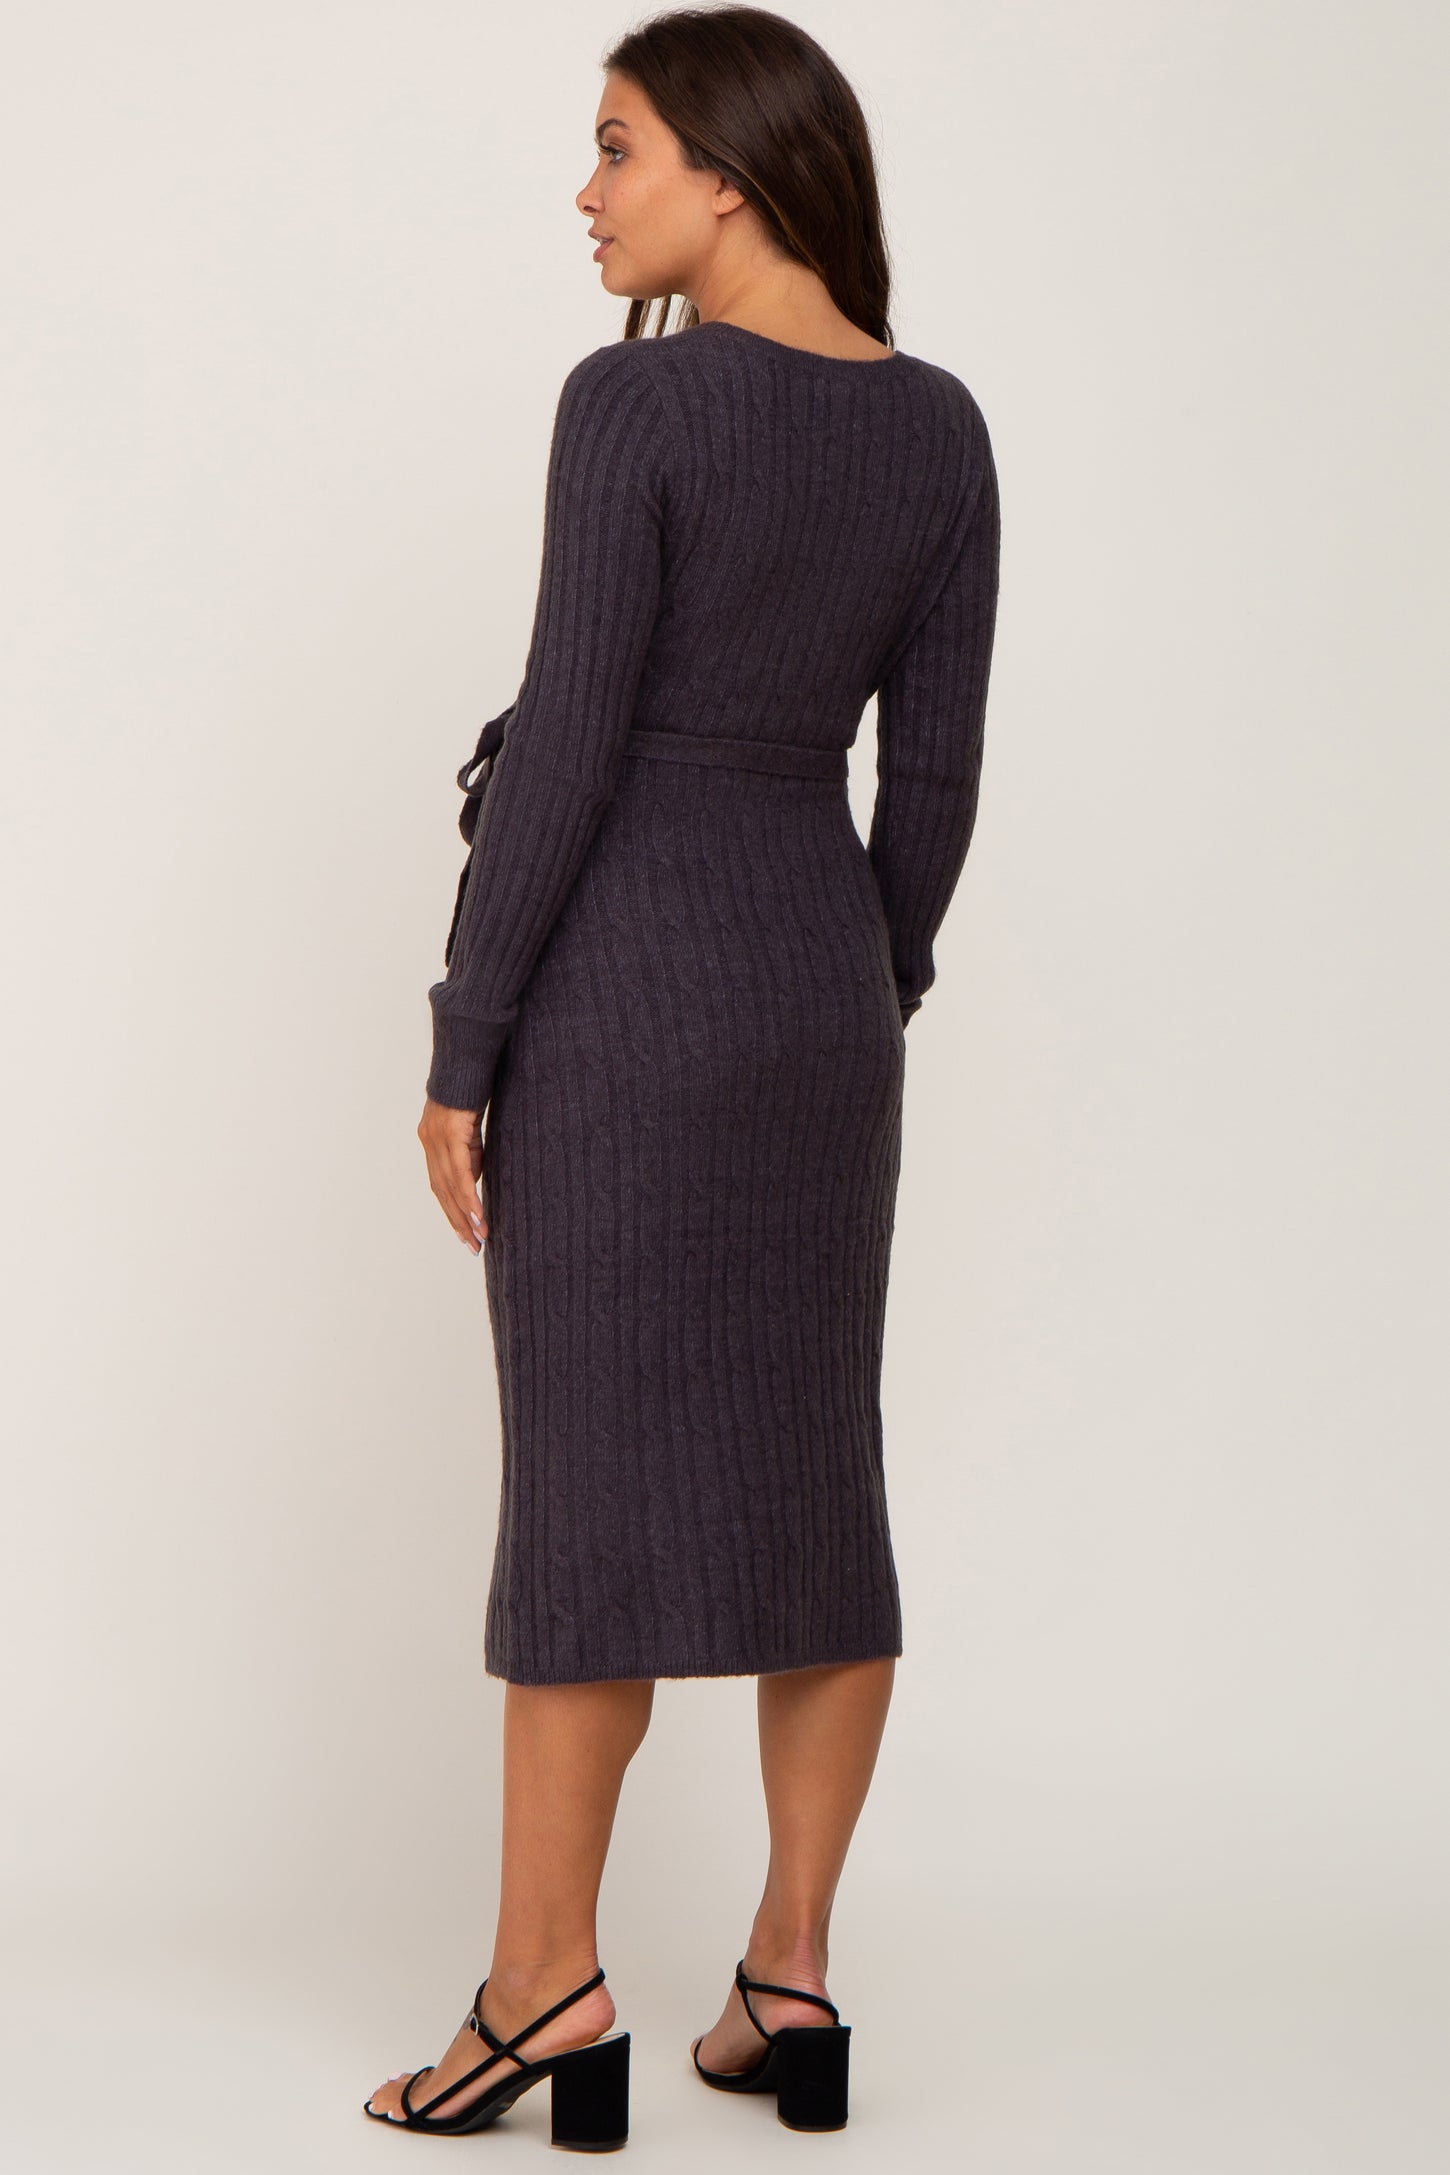 Charcoal Brushed Cable Knit Maternity Sweater Dress